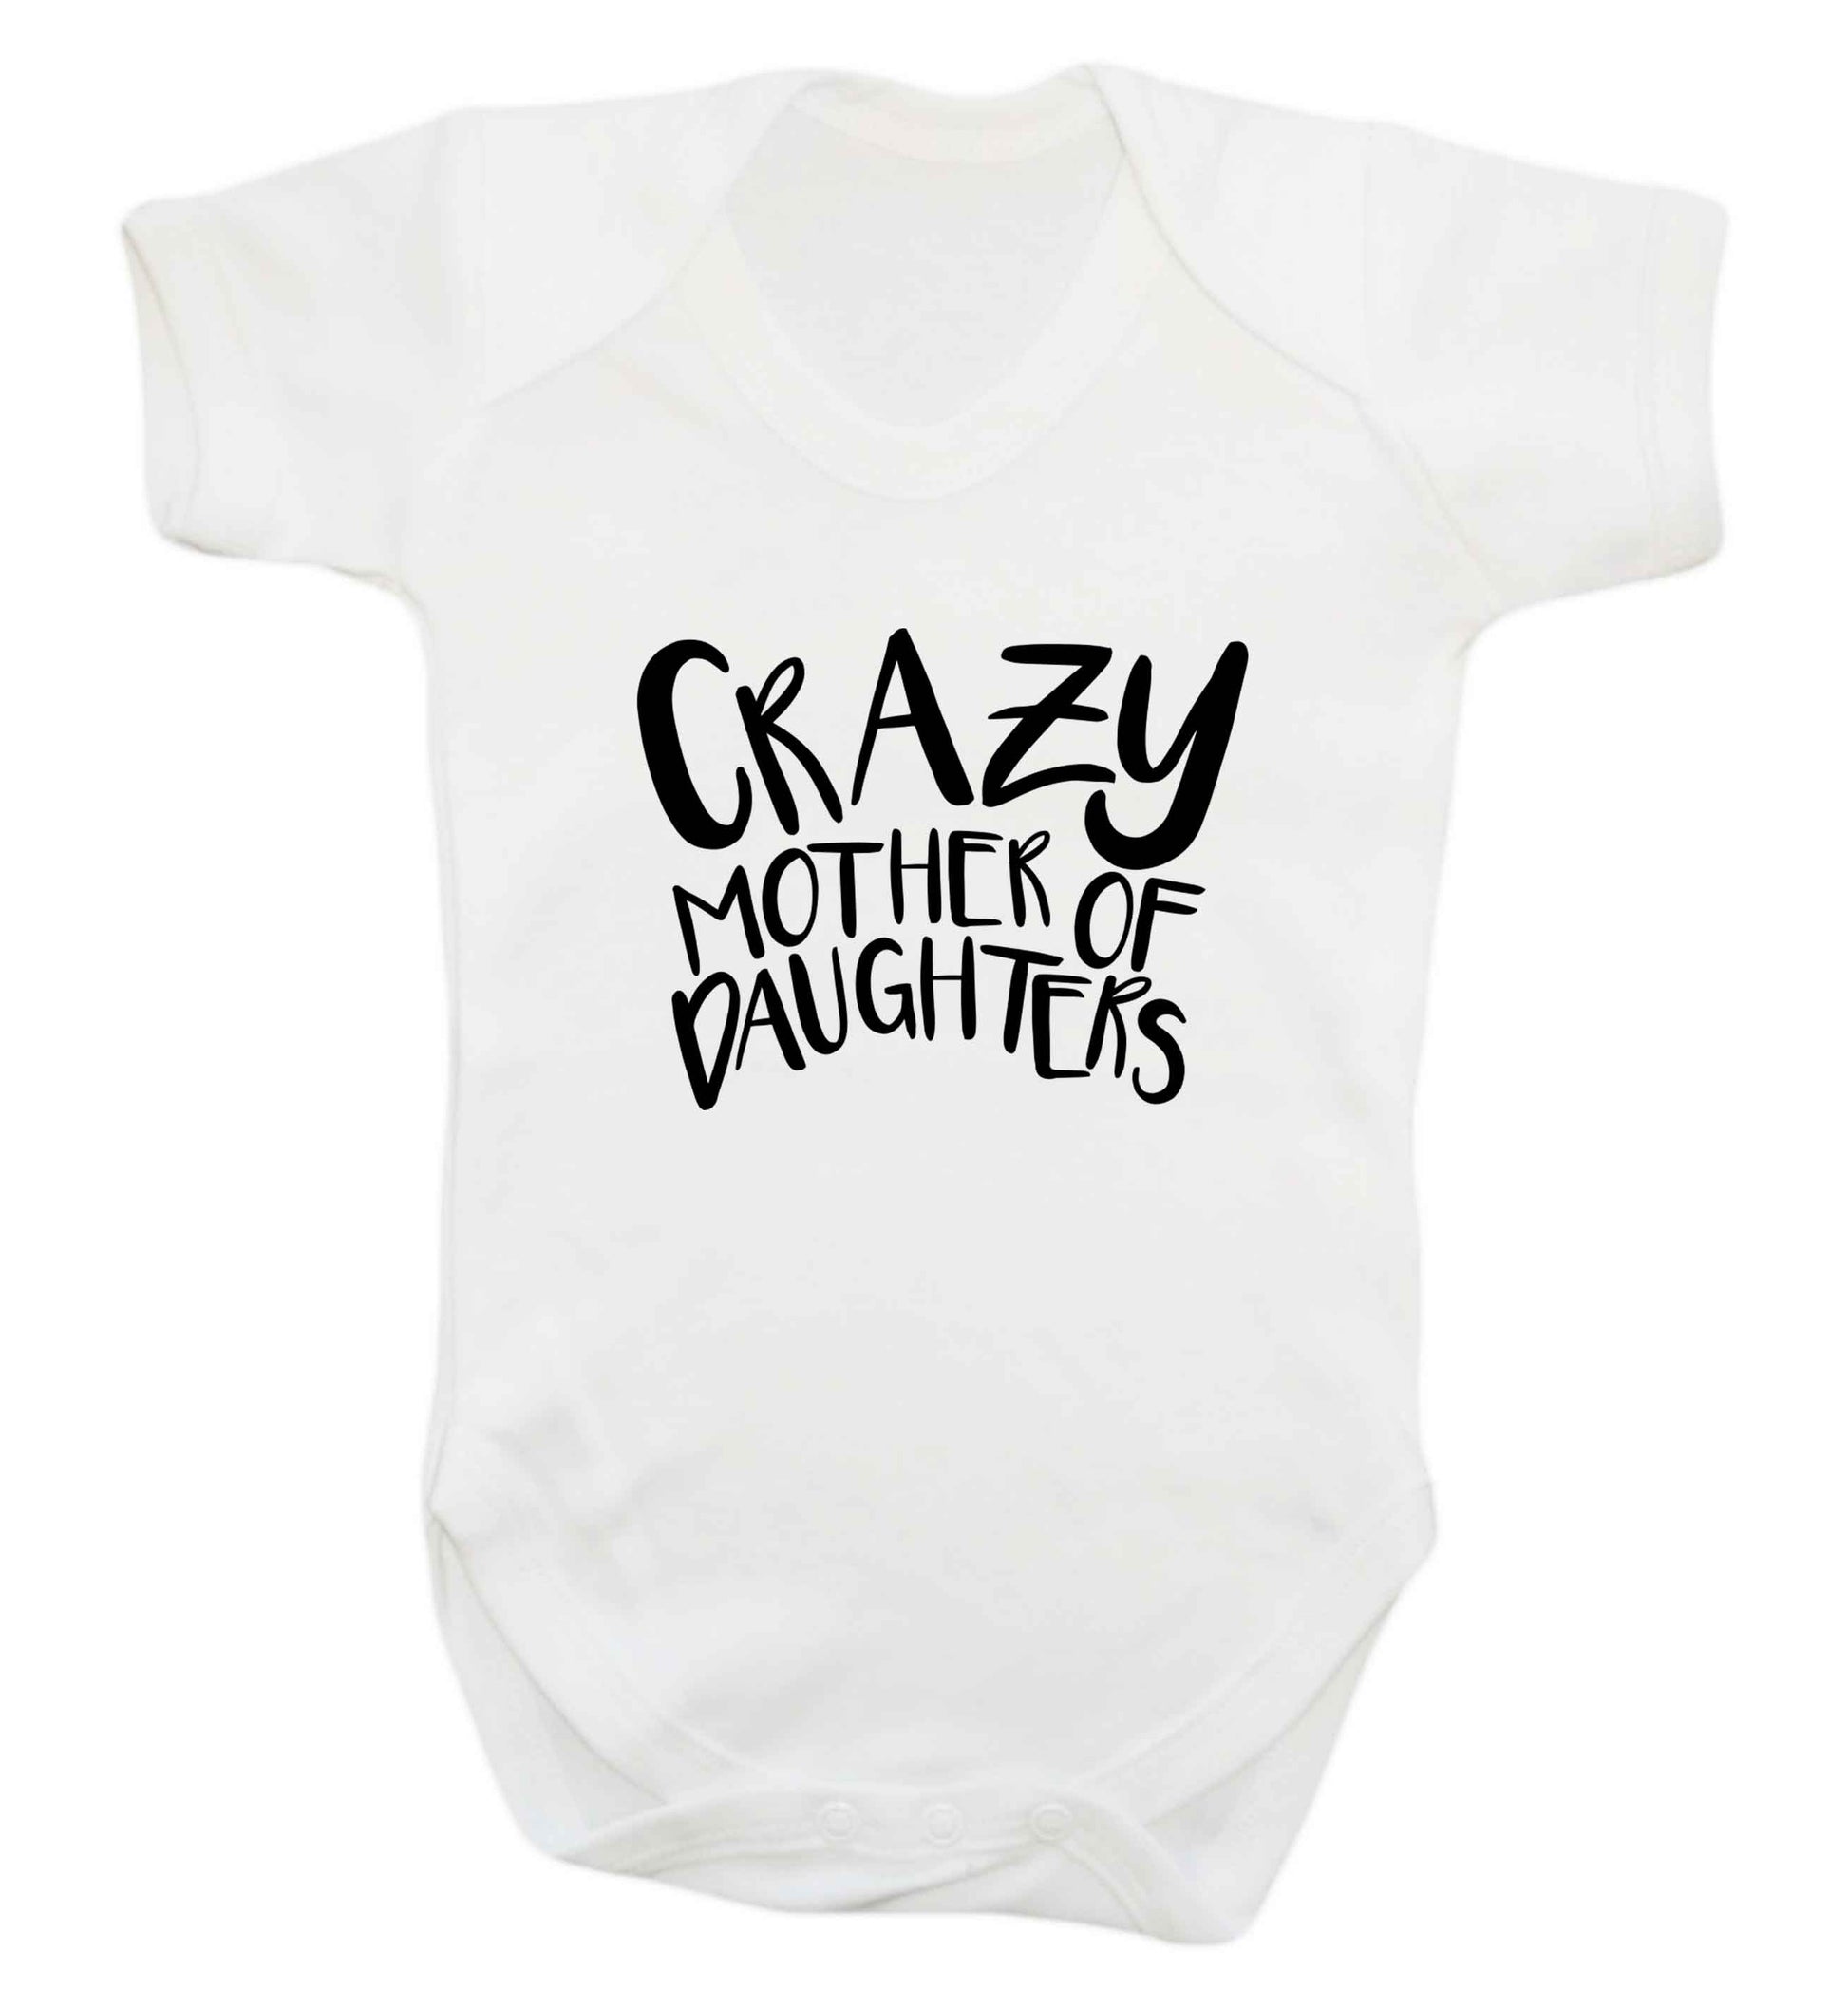 Crazy mother of daughters baby vest white 18-24 months